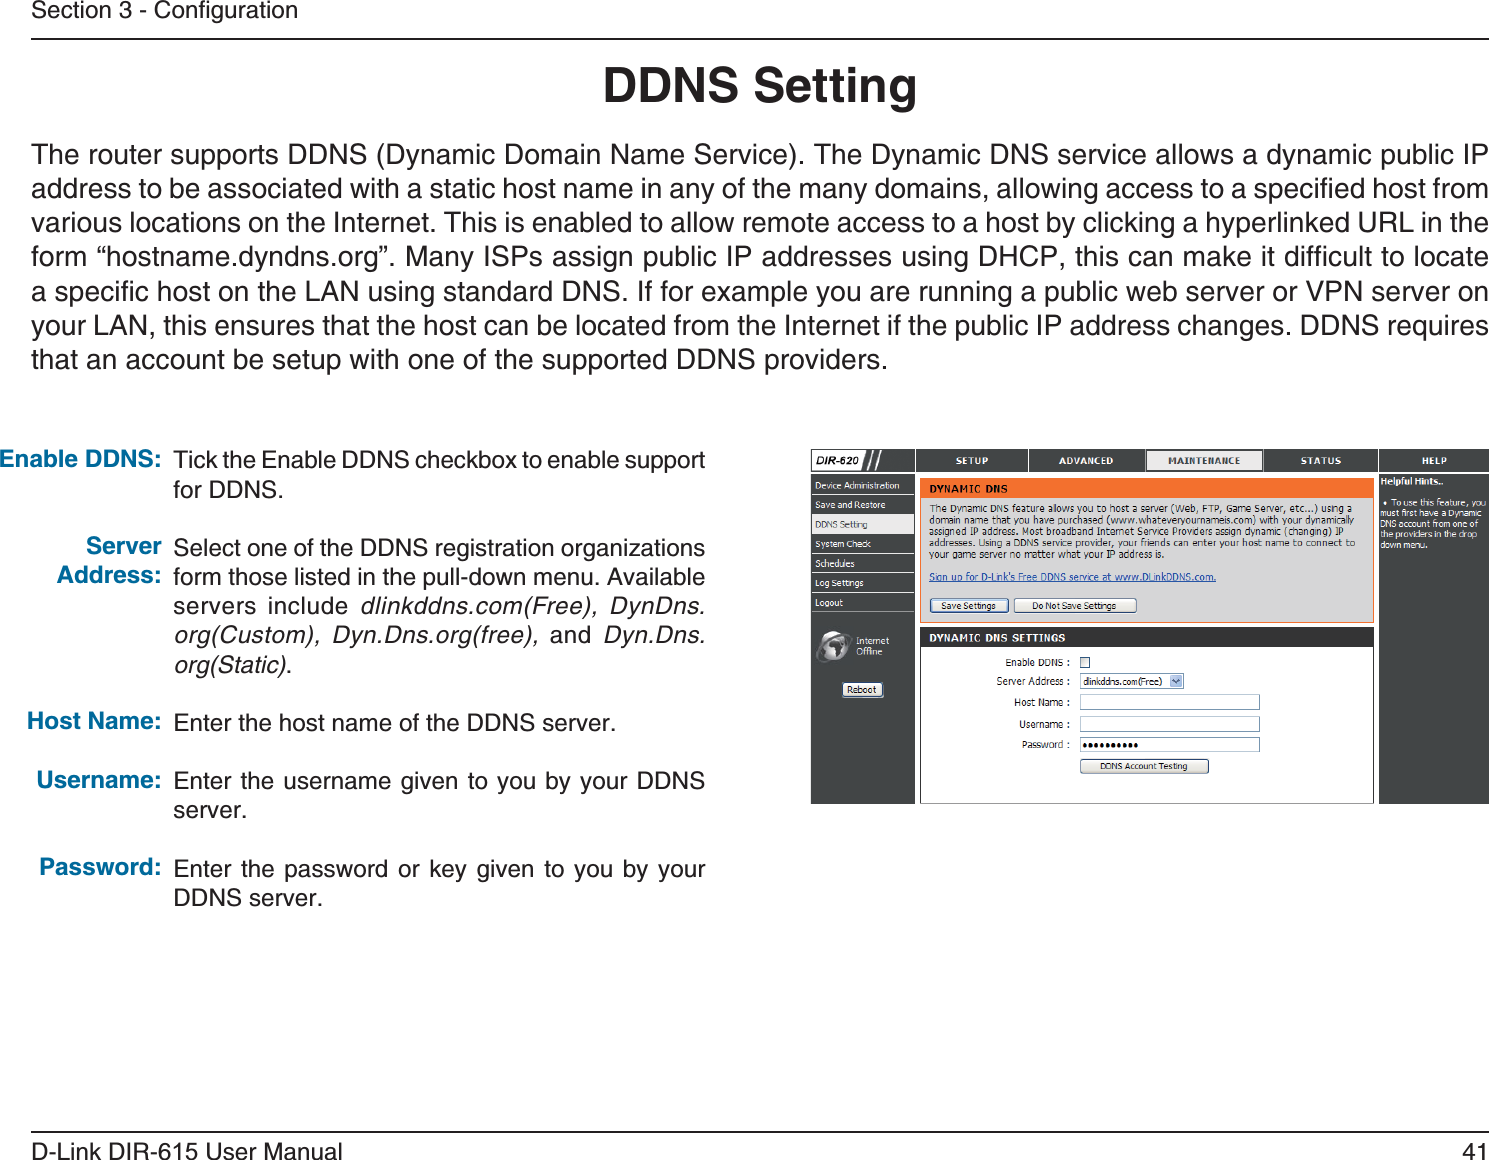 41D-Link DIR-6 User ManualSection 3 - ConfigurationTick the Enable DDNS checkbox to enable support for DDNS.Select one of the DDNS registration organizations form those listed in the pull-down menu. Available servers include dlinkddns.com(Free), DynDns.org(Custom), Dyn.Dns.org(free), and  Dyn.Dns.org(Static).Enter the host name of the DDNS server.Enter the username given to you by your DDNS server.Enter the password or key given to you by your DDNS server.The router supports DDNS (Dynamic Domain Name Service). The Dynamic DNS service allows a dynamic public IP address to be associated with a static host name in any of the many domains, allowing access to a specified host from various locations on the Internet. This is enabled to allow remote access to a host by clicking a hyperlinked URL in the form “hostname.dyndns.org”. Many ISPs assign public IP addresses using DHCP, this can make it difficult to locate a specific host on the LAN using standard DNS. If for example you are running a public web server or VPN server on your LAN, this ensures that the host can be located from the Internet if the public IP address changes. DDNS requires that an account be setup with one of the supported DDNS providers.